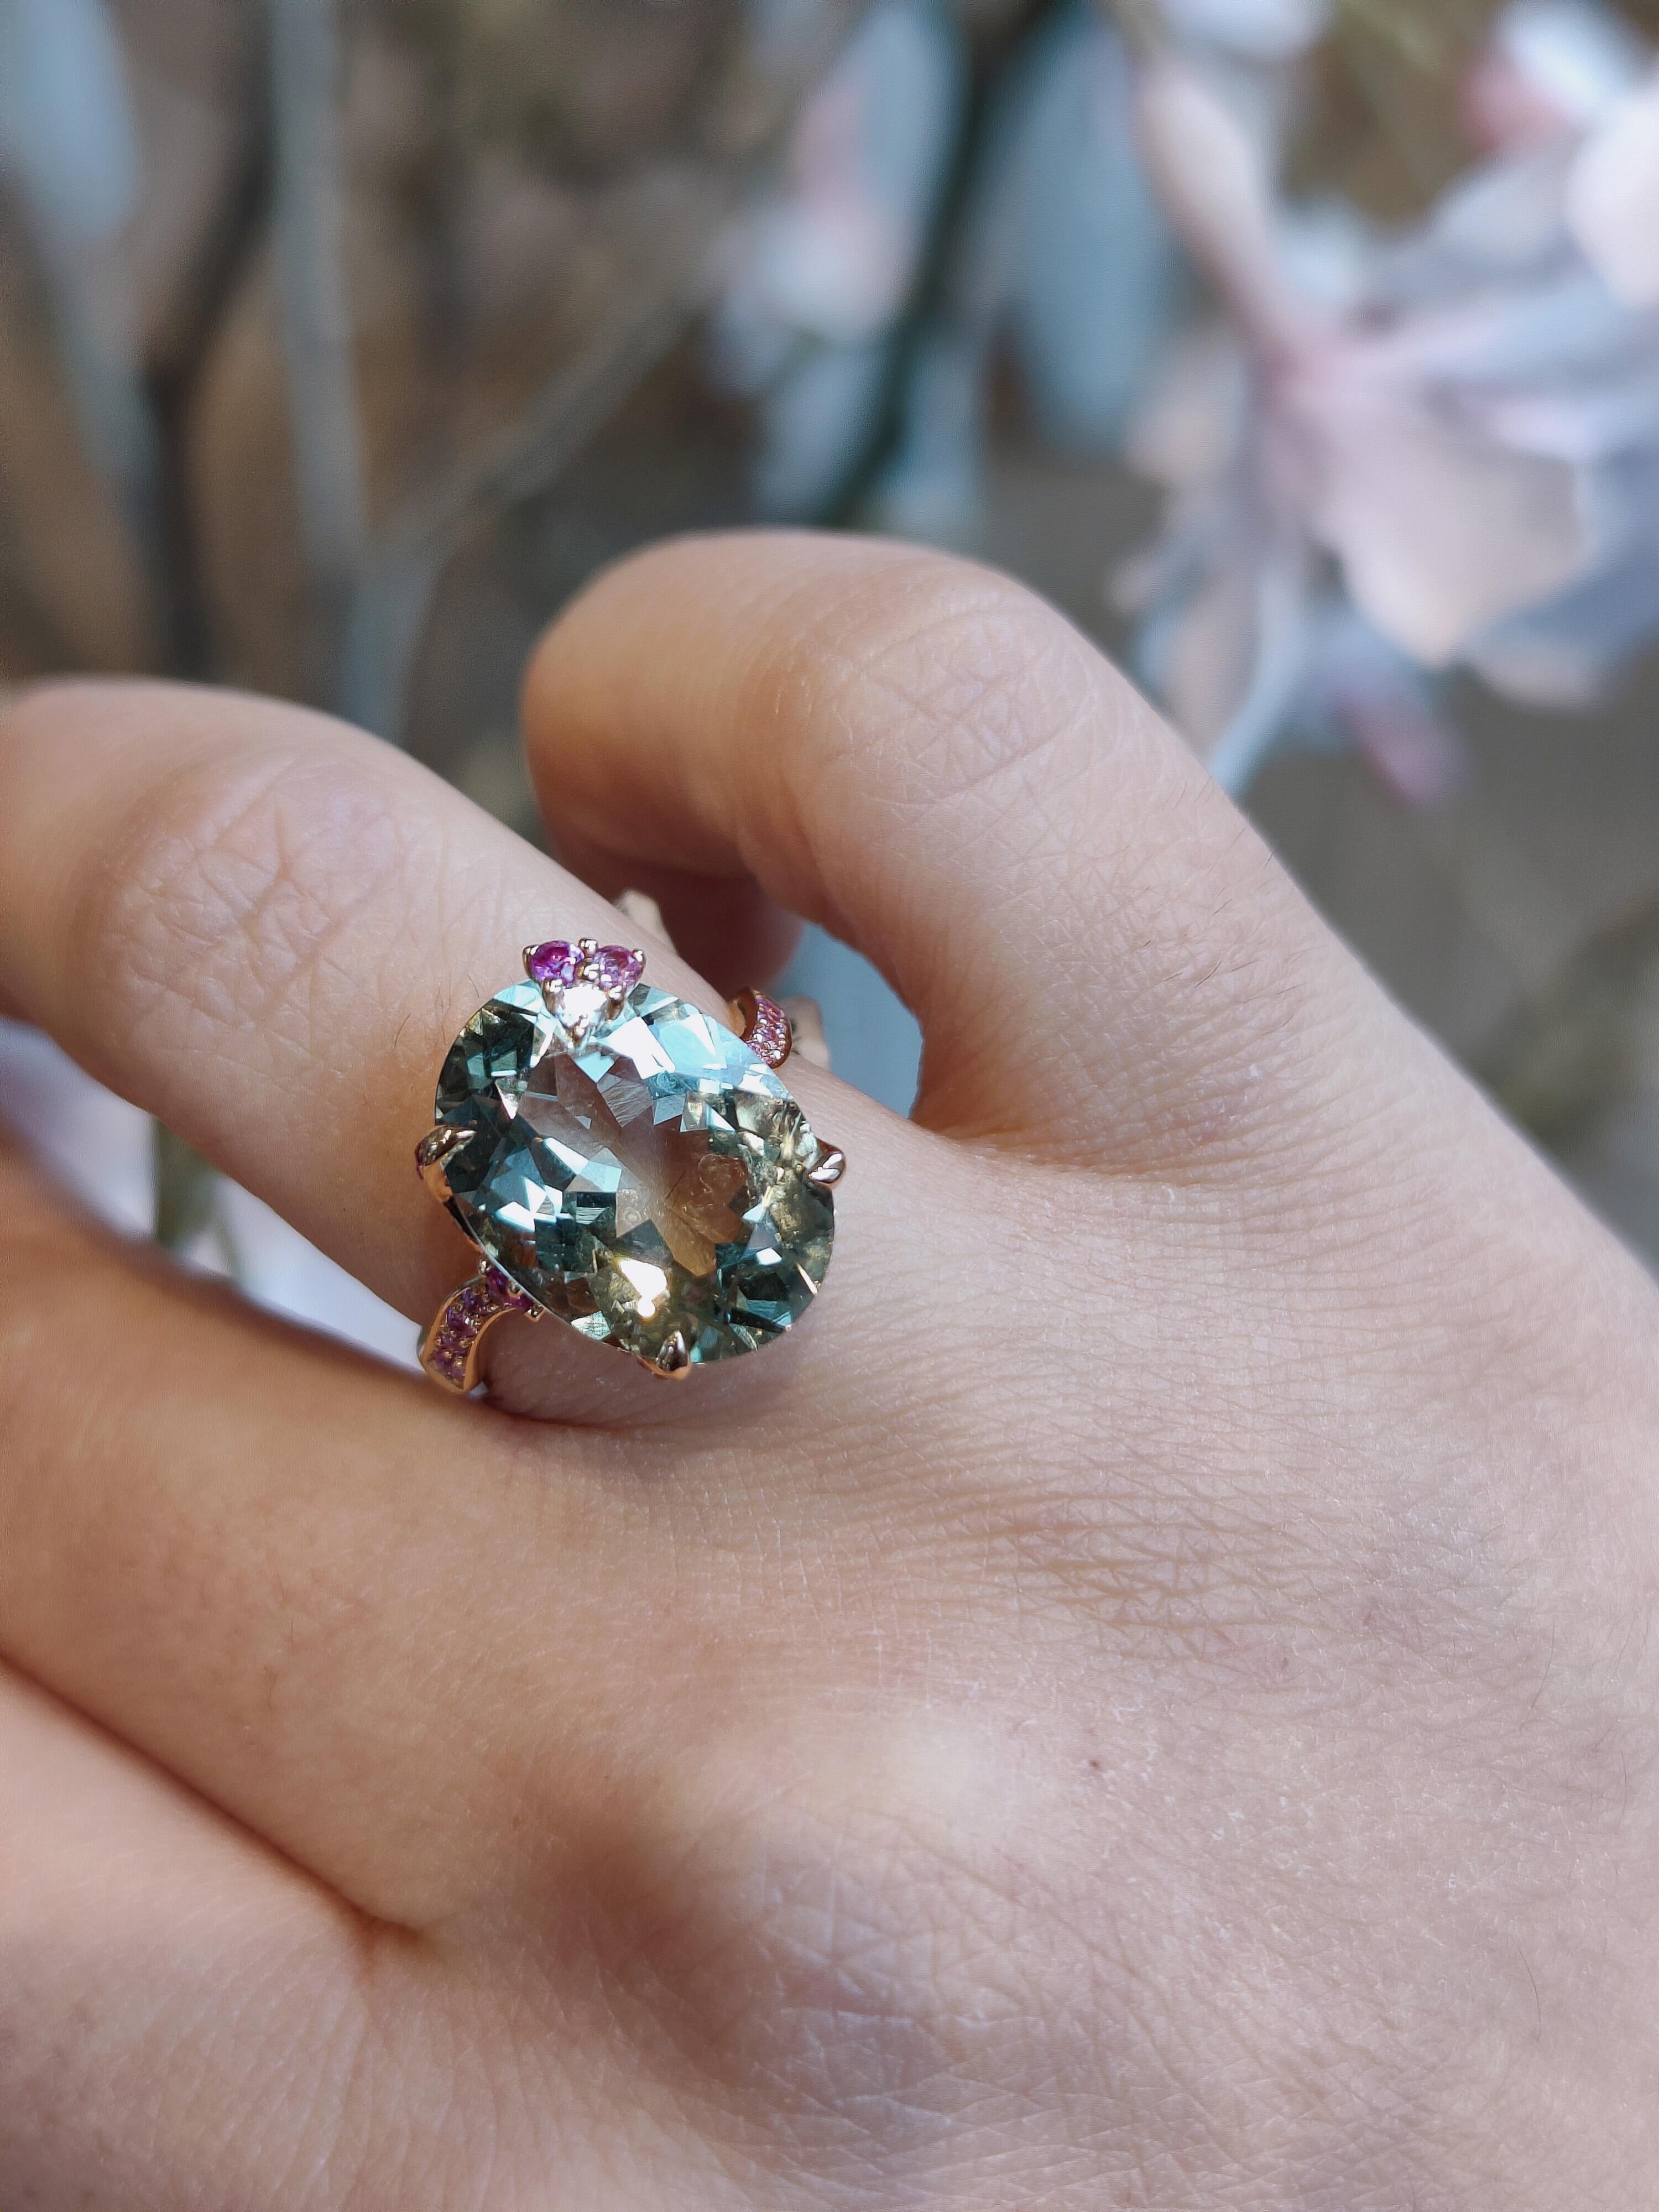 This Bonebakker ring is made in 18 karat rose gold featuring a 15mm x 11 mm oval cut prasiolite, pink sapphires and 0.0.3ct of diamonds.  Prasiolite is a green amethyst that radiates energy and balance. This big and colourful stone will sparkle in